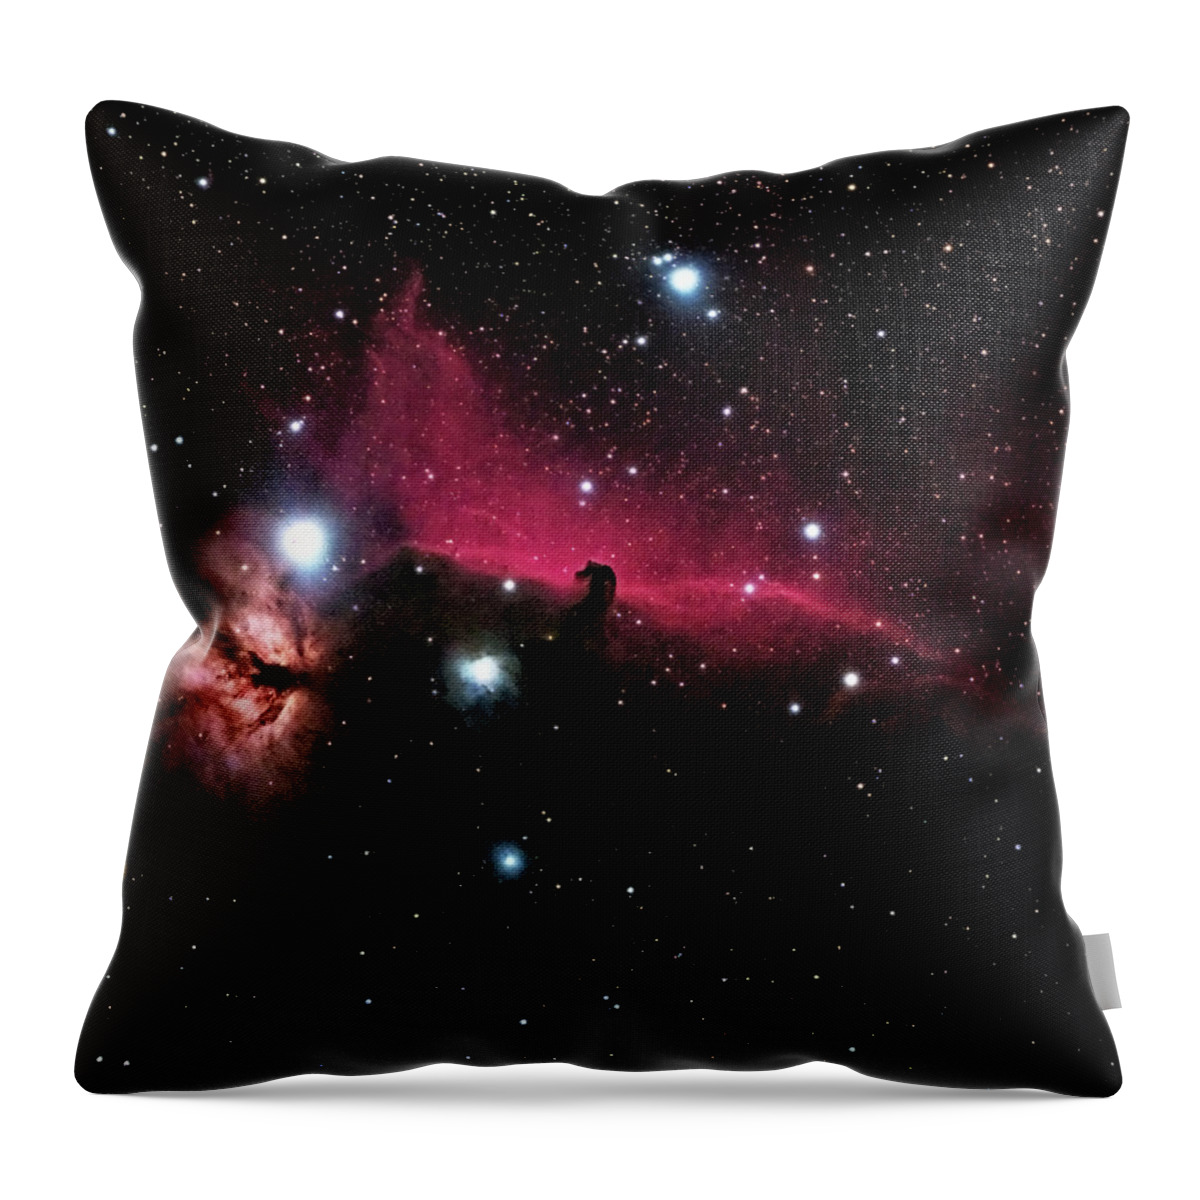 Mystery Throw Pillow featuring the photograph The Horsehead Nebula, Ic 434 by A. V. Ley